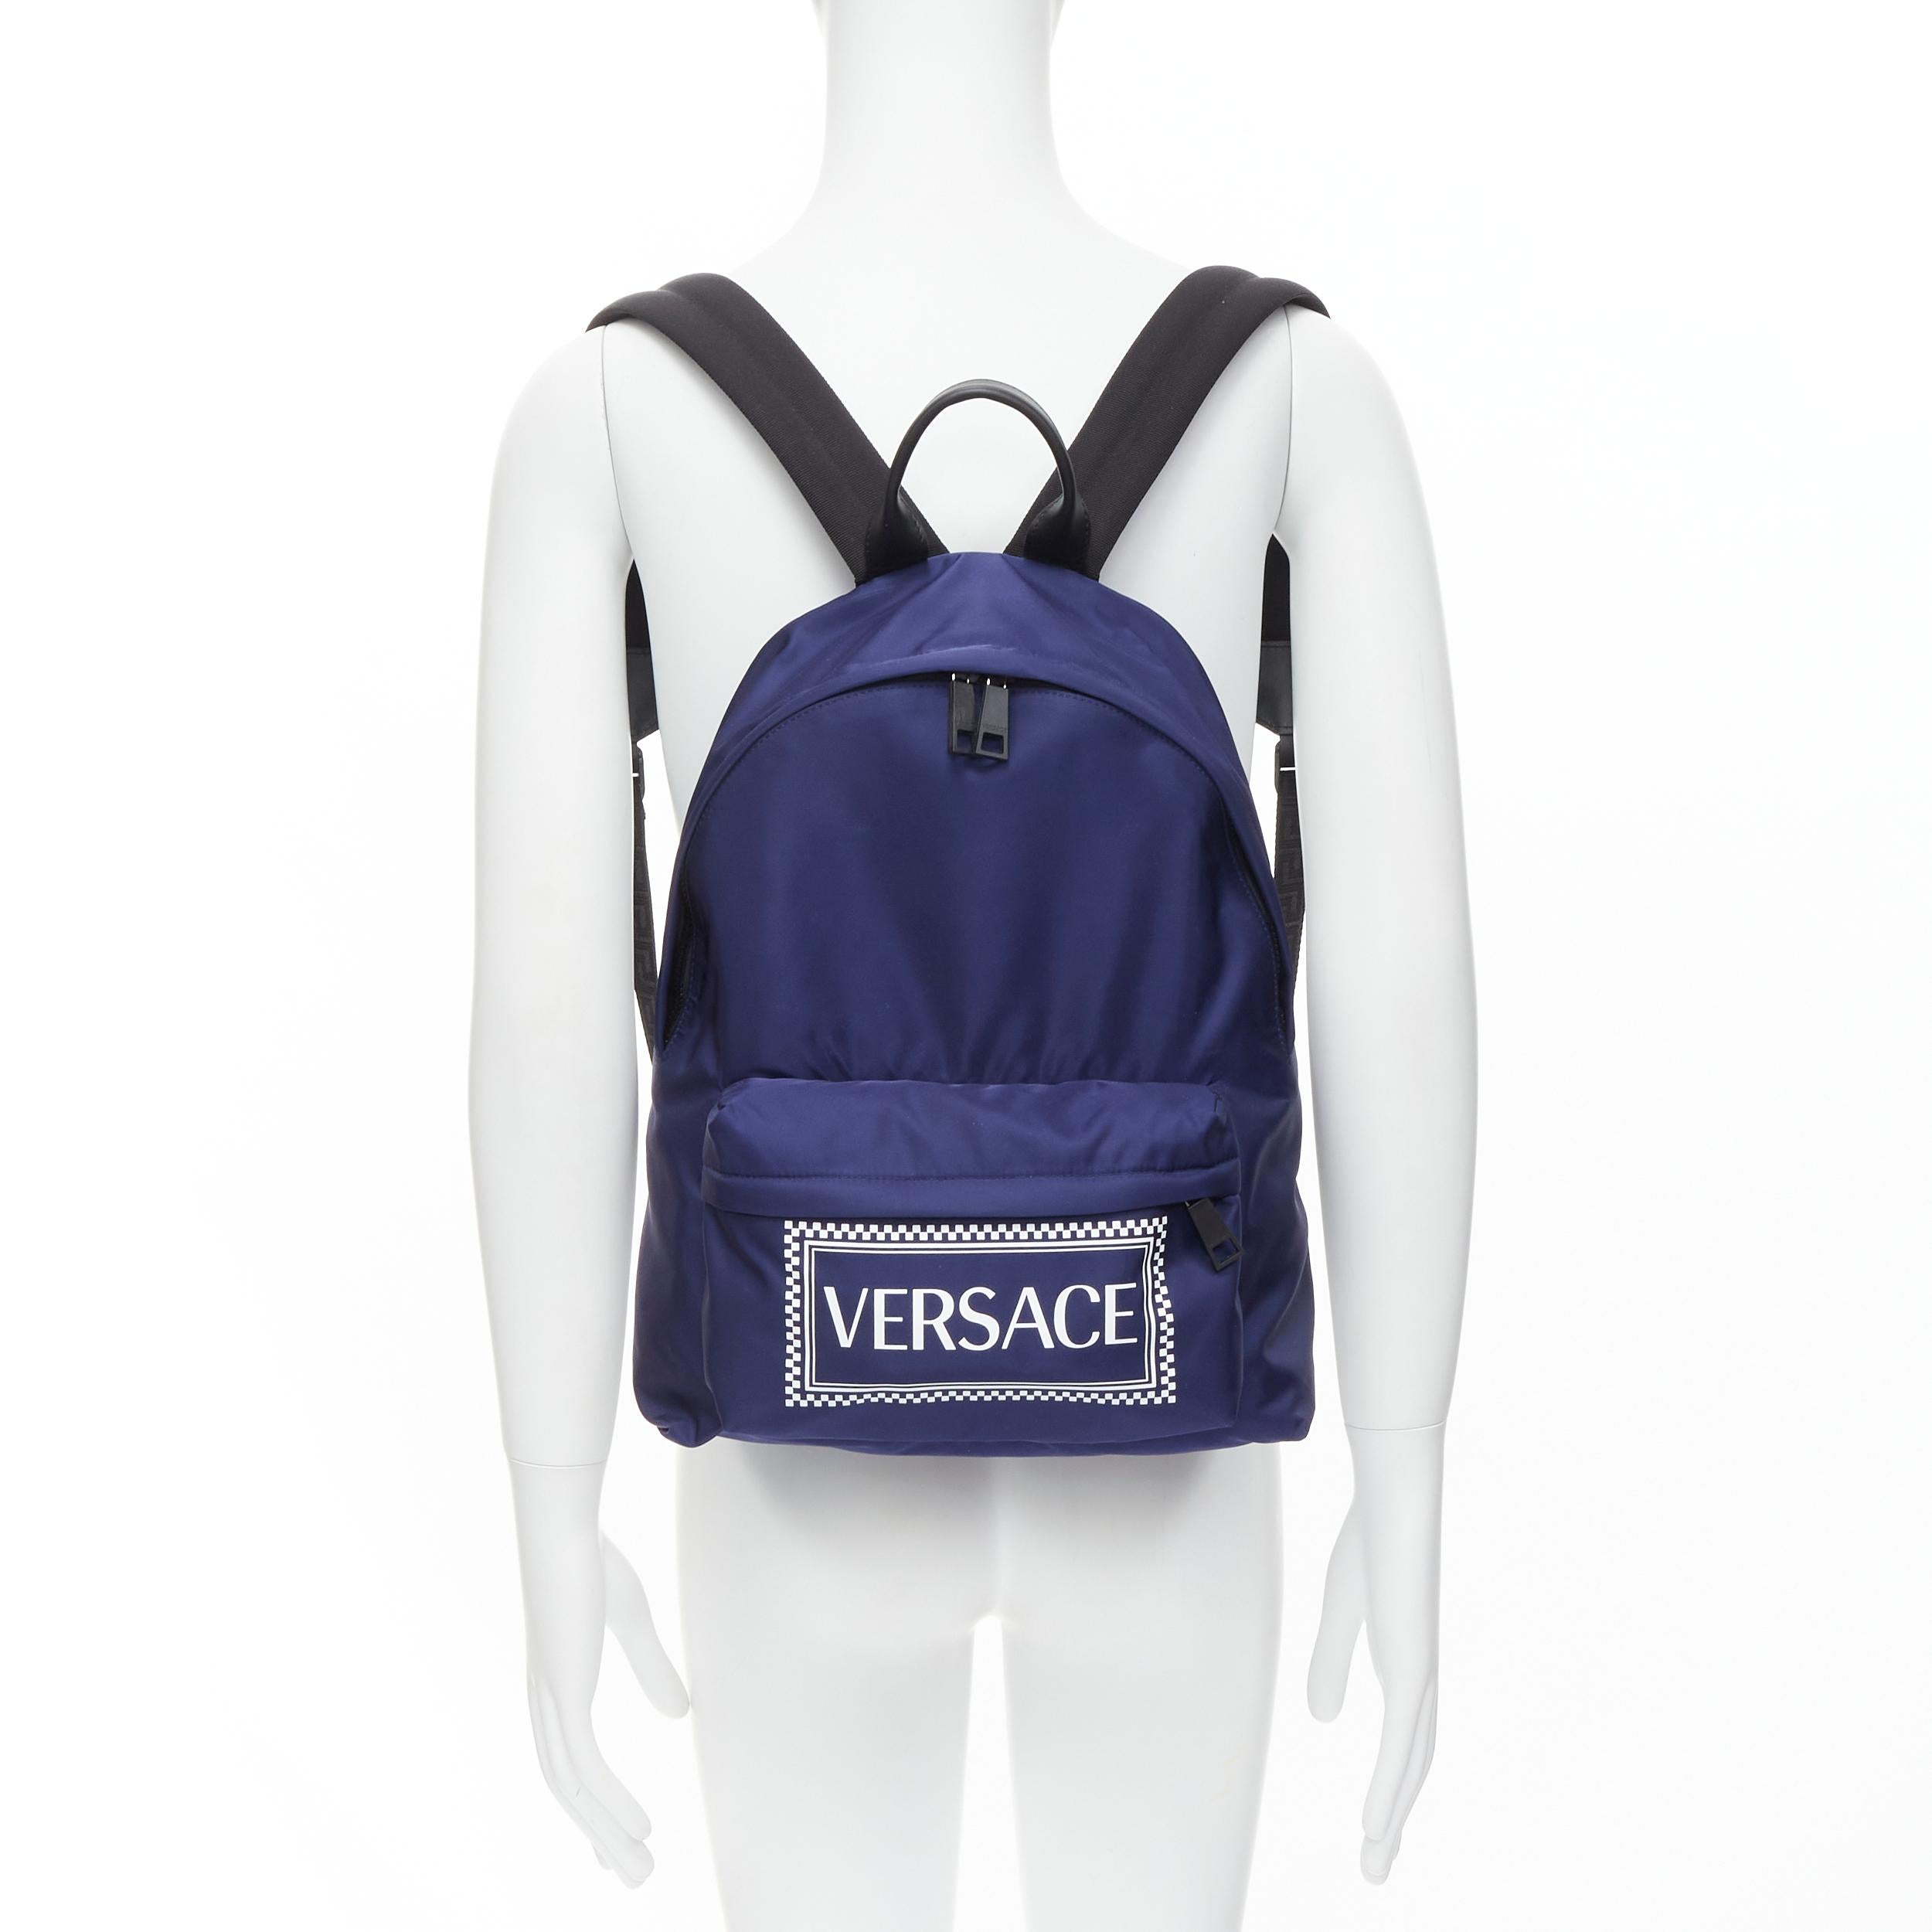 new VERSACE 90's Box Logo navy blue nylon Greca strap backpack 
Reference: TGAS/C00243 
Brand: Versace 
Designer: Donatella Versace 
Model: DFZ5350 DNYVER K88BN 
Collection: 90's Logo Collection 
Material: Nylon 
Color: Navy 
Pattern: Solid